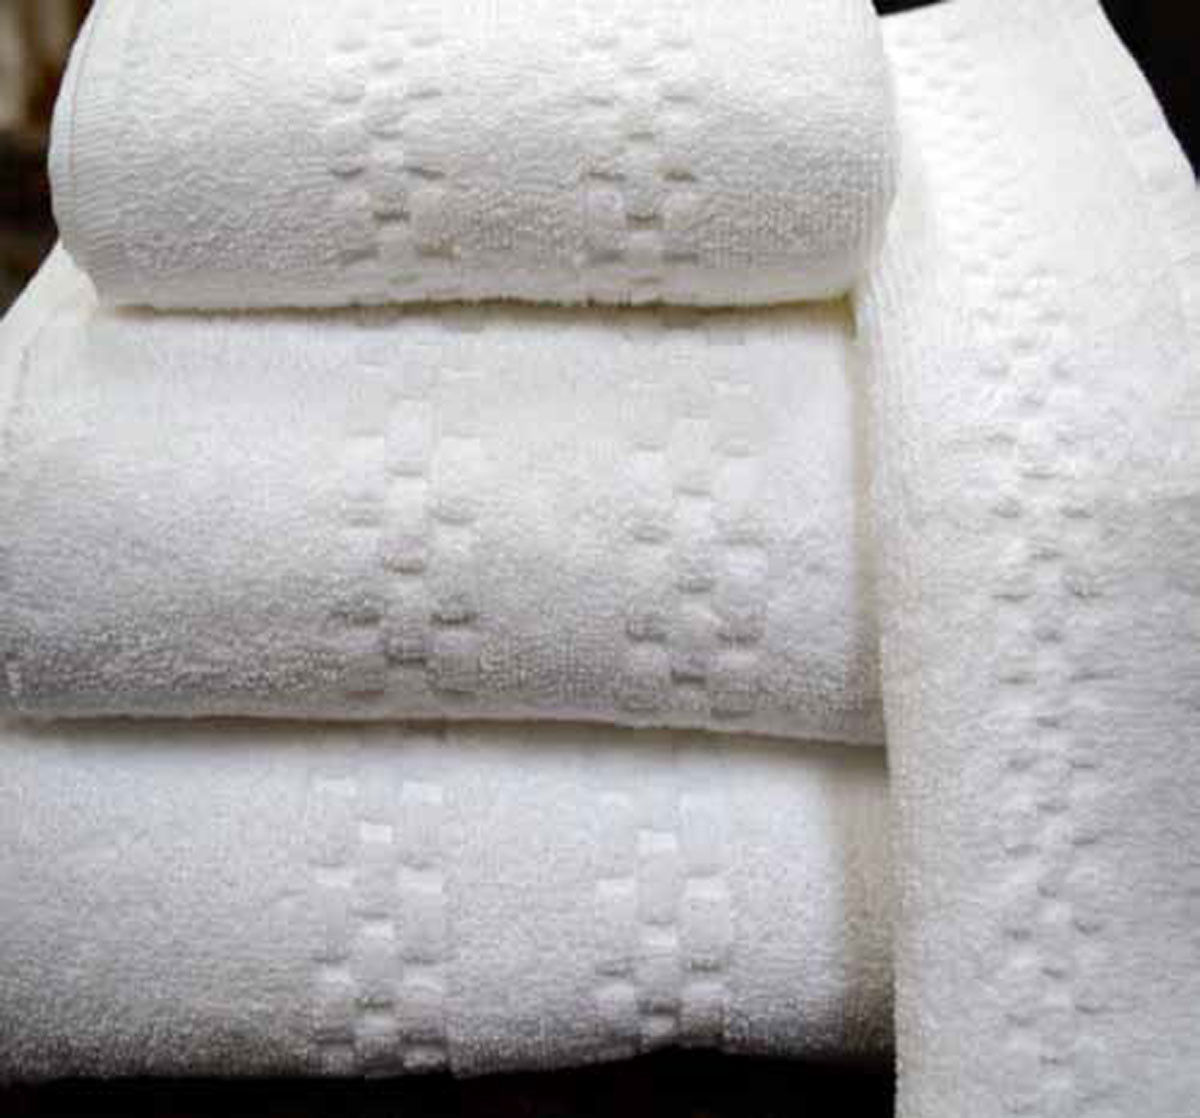 What's the towels definition and features of Oxford Viceroy Room Towels?